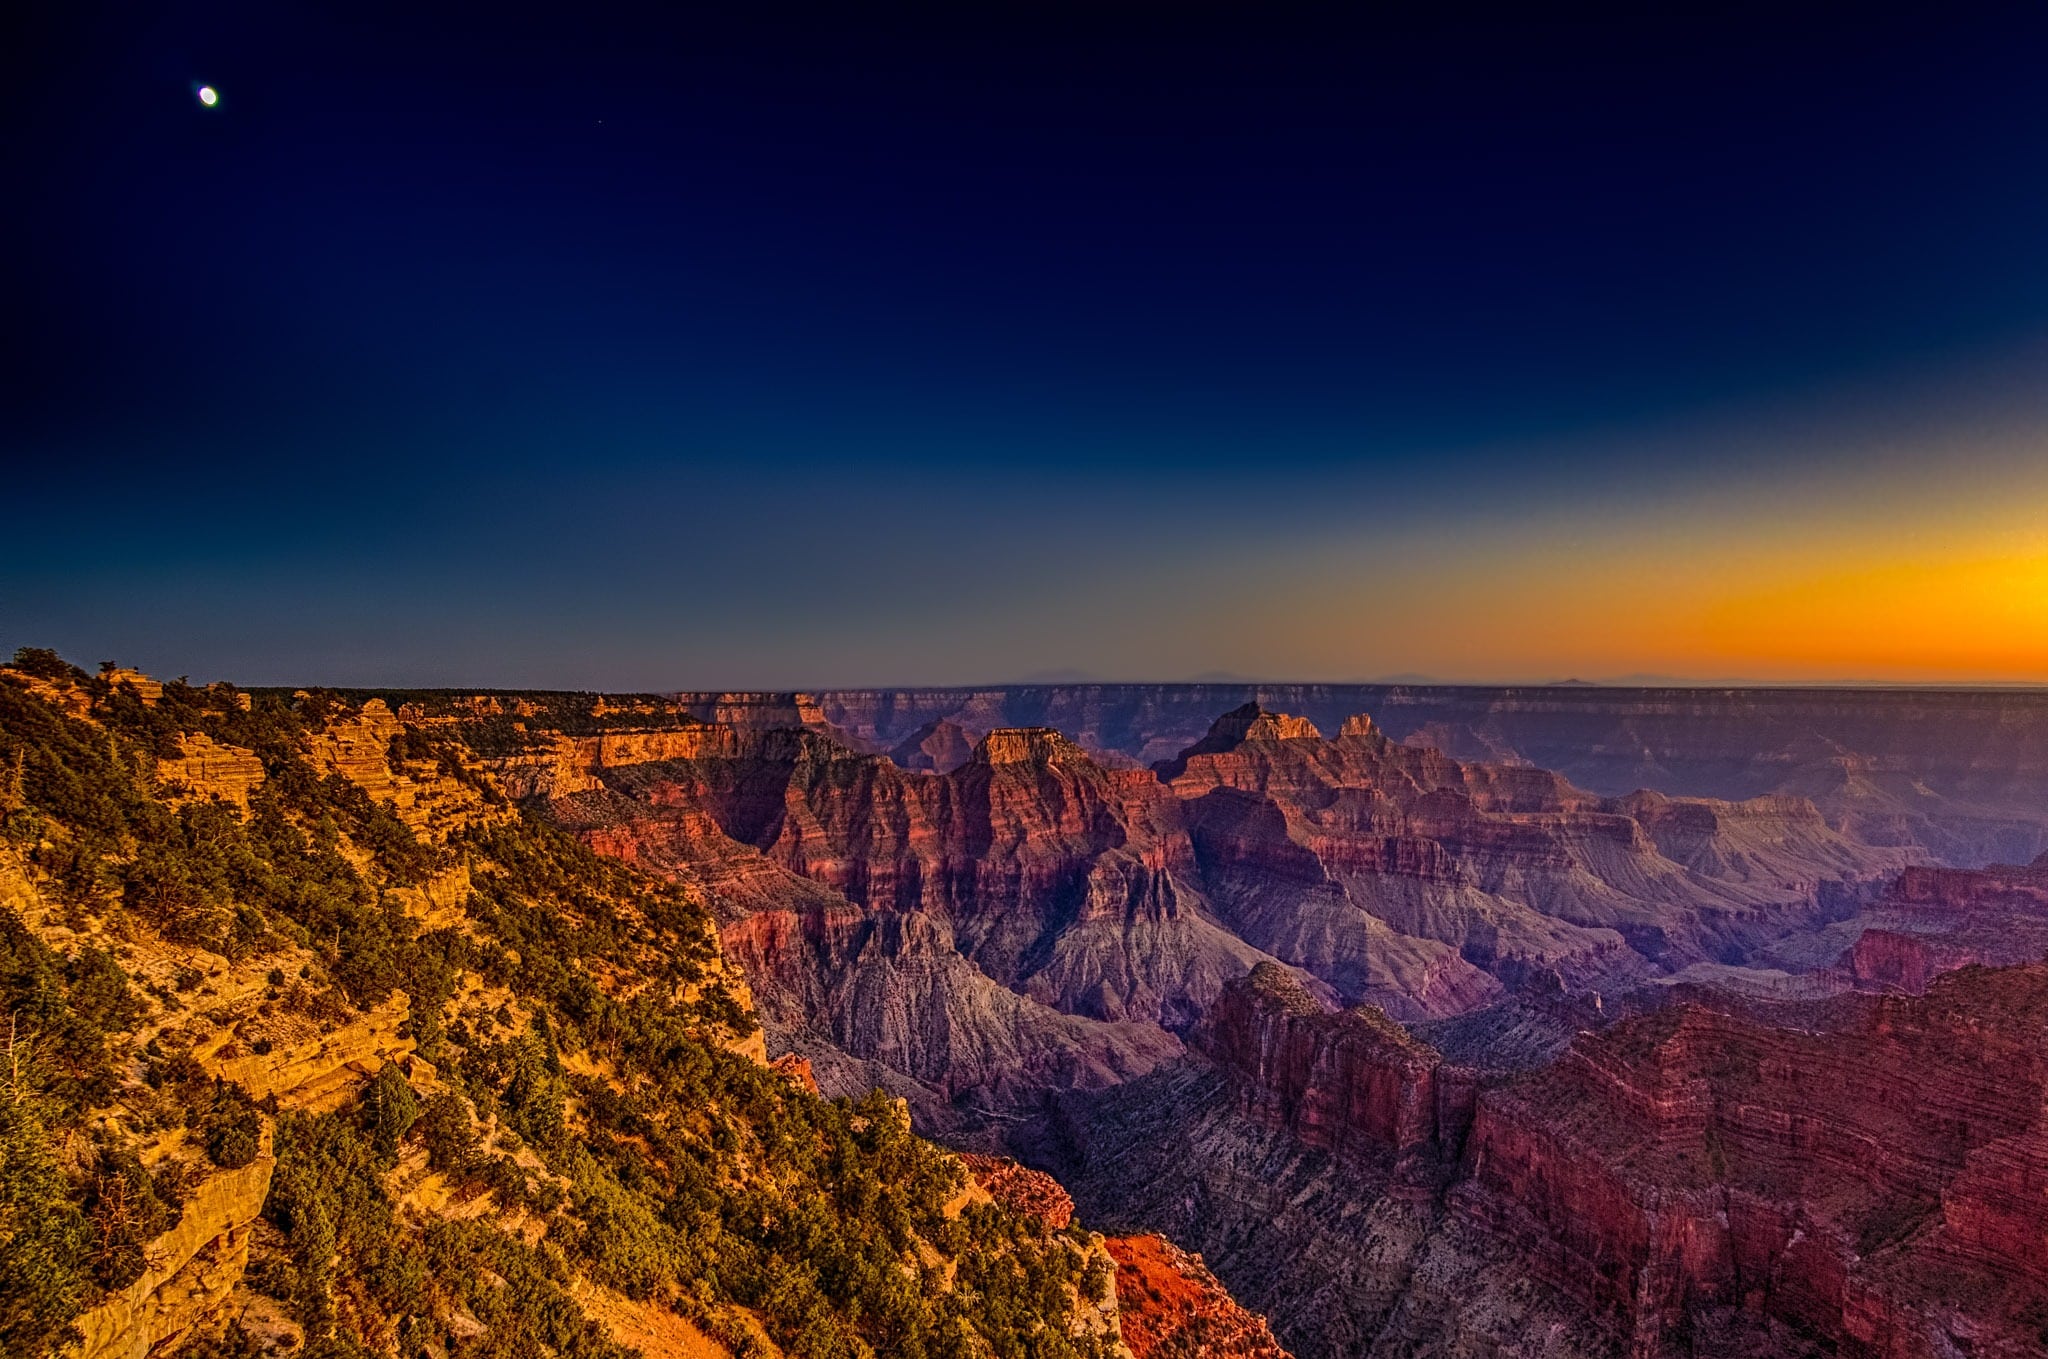 Dusk at the intersection of The Transept and Bright Angel Canyon on the North Rim of the Grand Canyon. - Grand Canyon North Rim